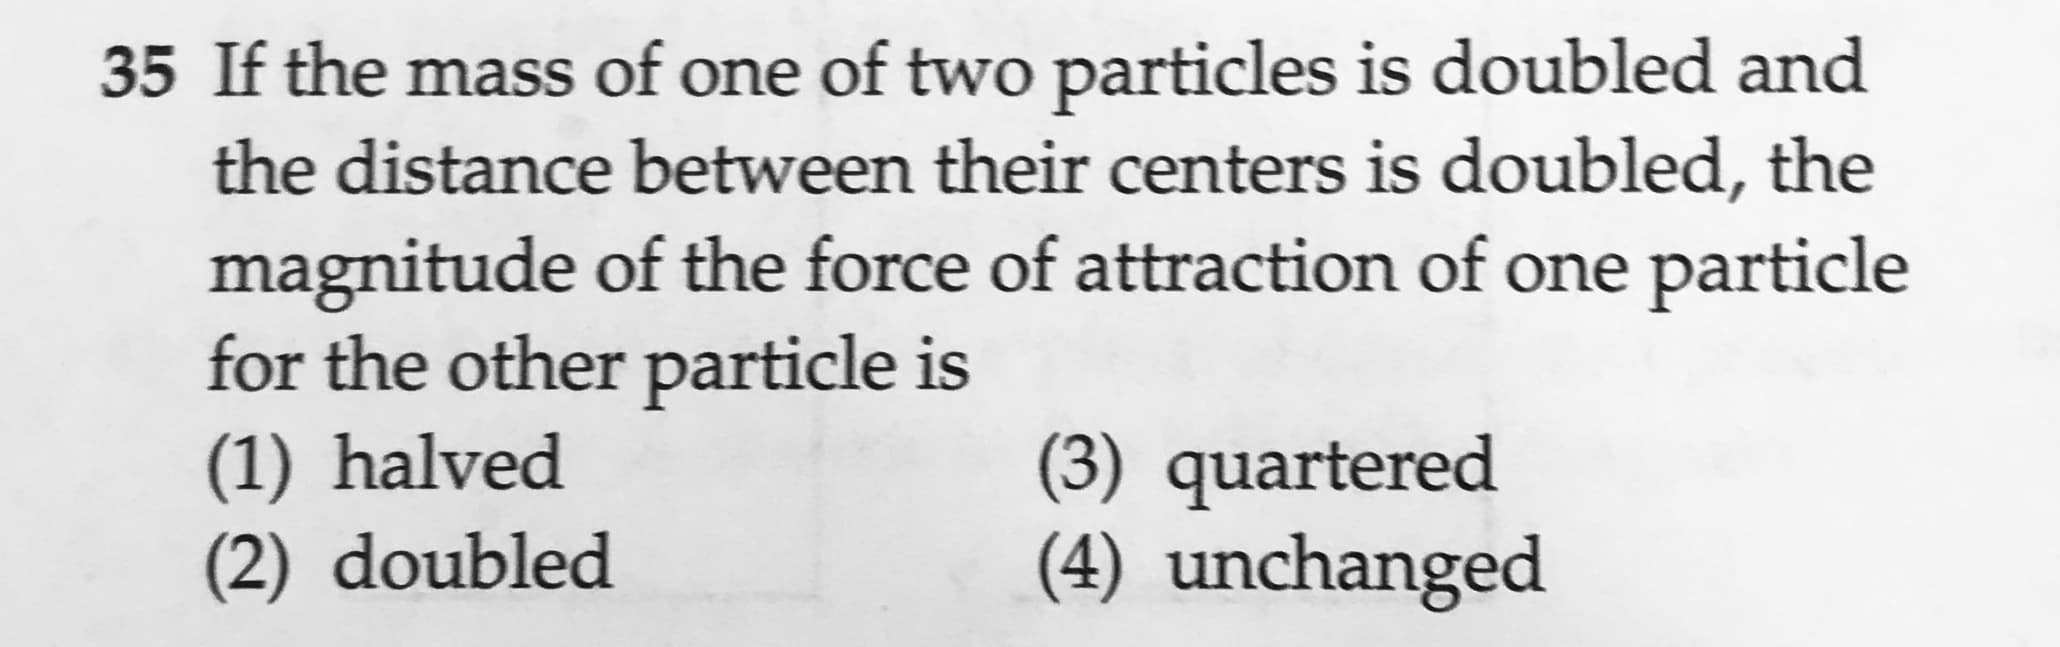 35 If the mass of one of two particles is doubled and
the distance between their centers is doubled, the
magnitude of the force of attraction of one particle
for the other particle is
(1) halved
(2) doubled
(3) quartered
(4) unchanged
